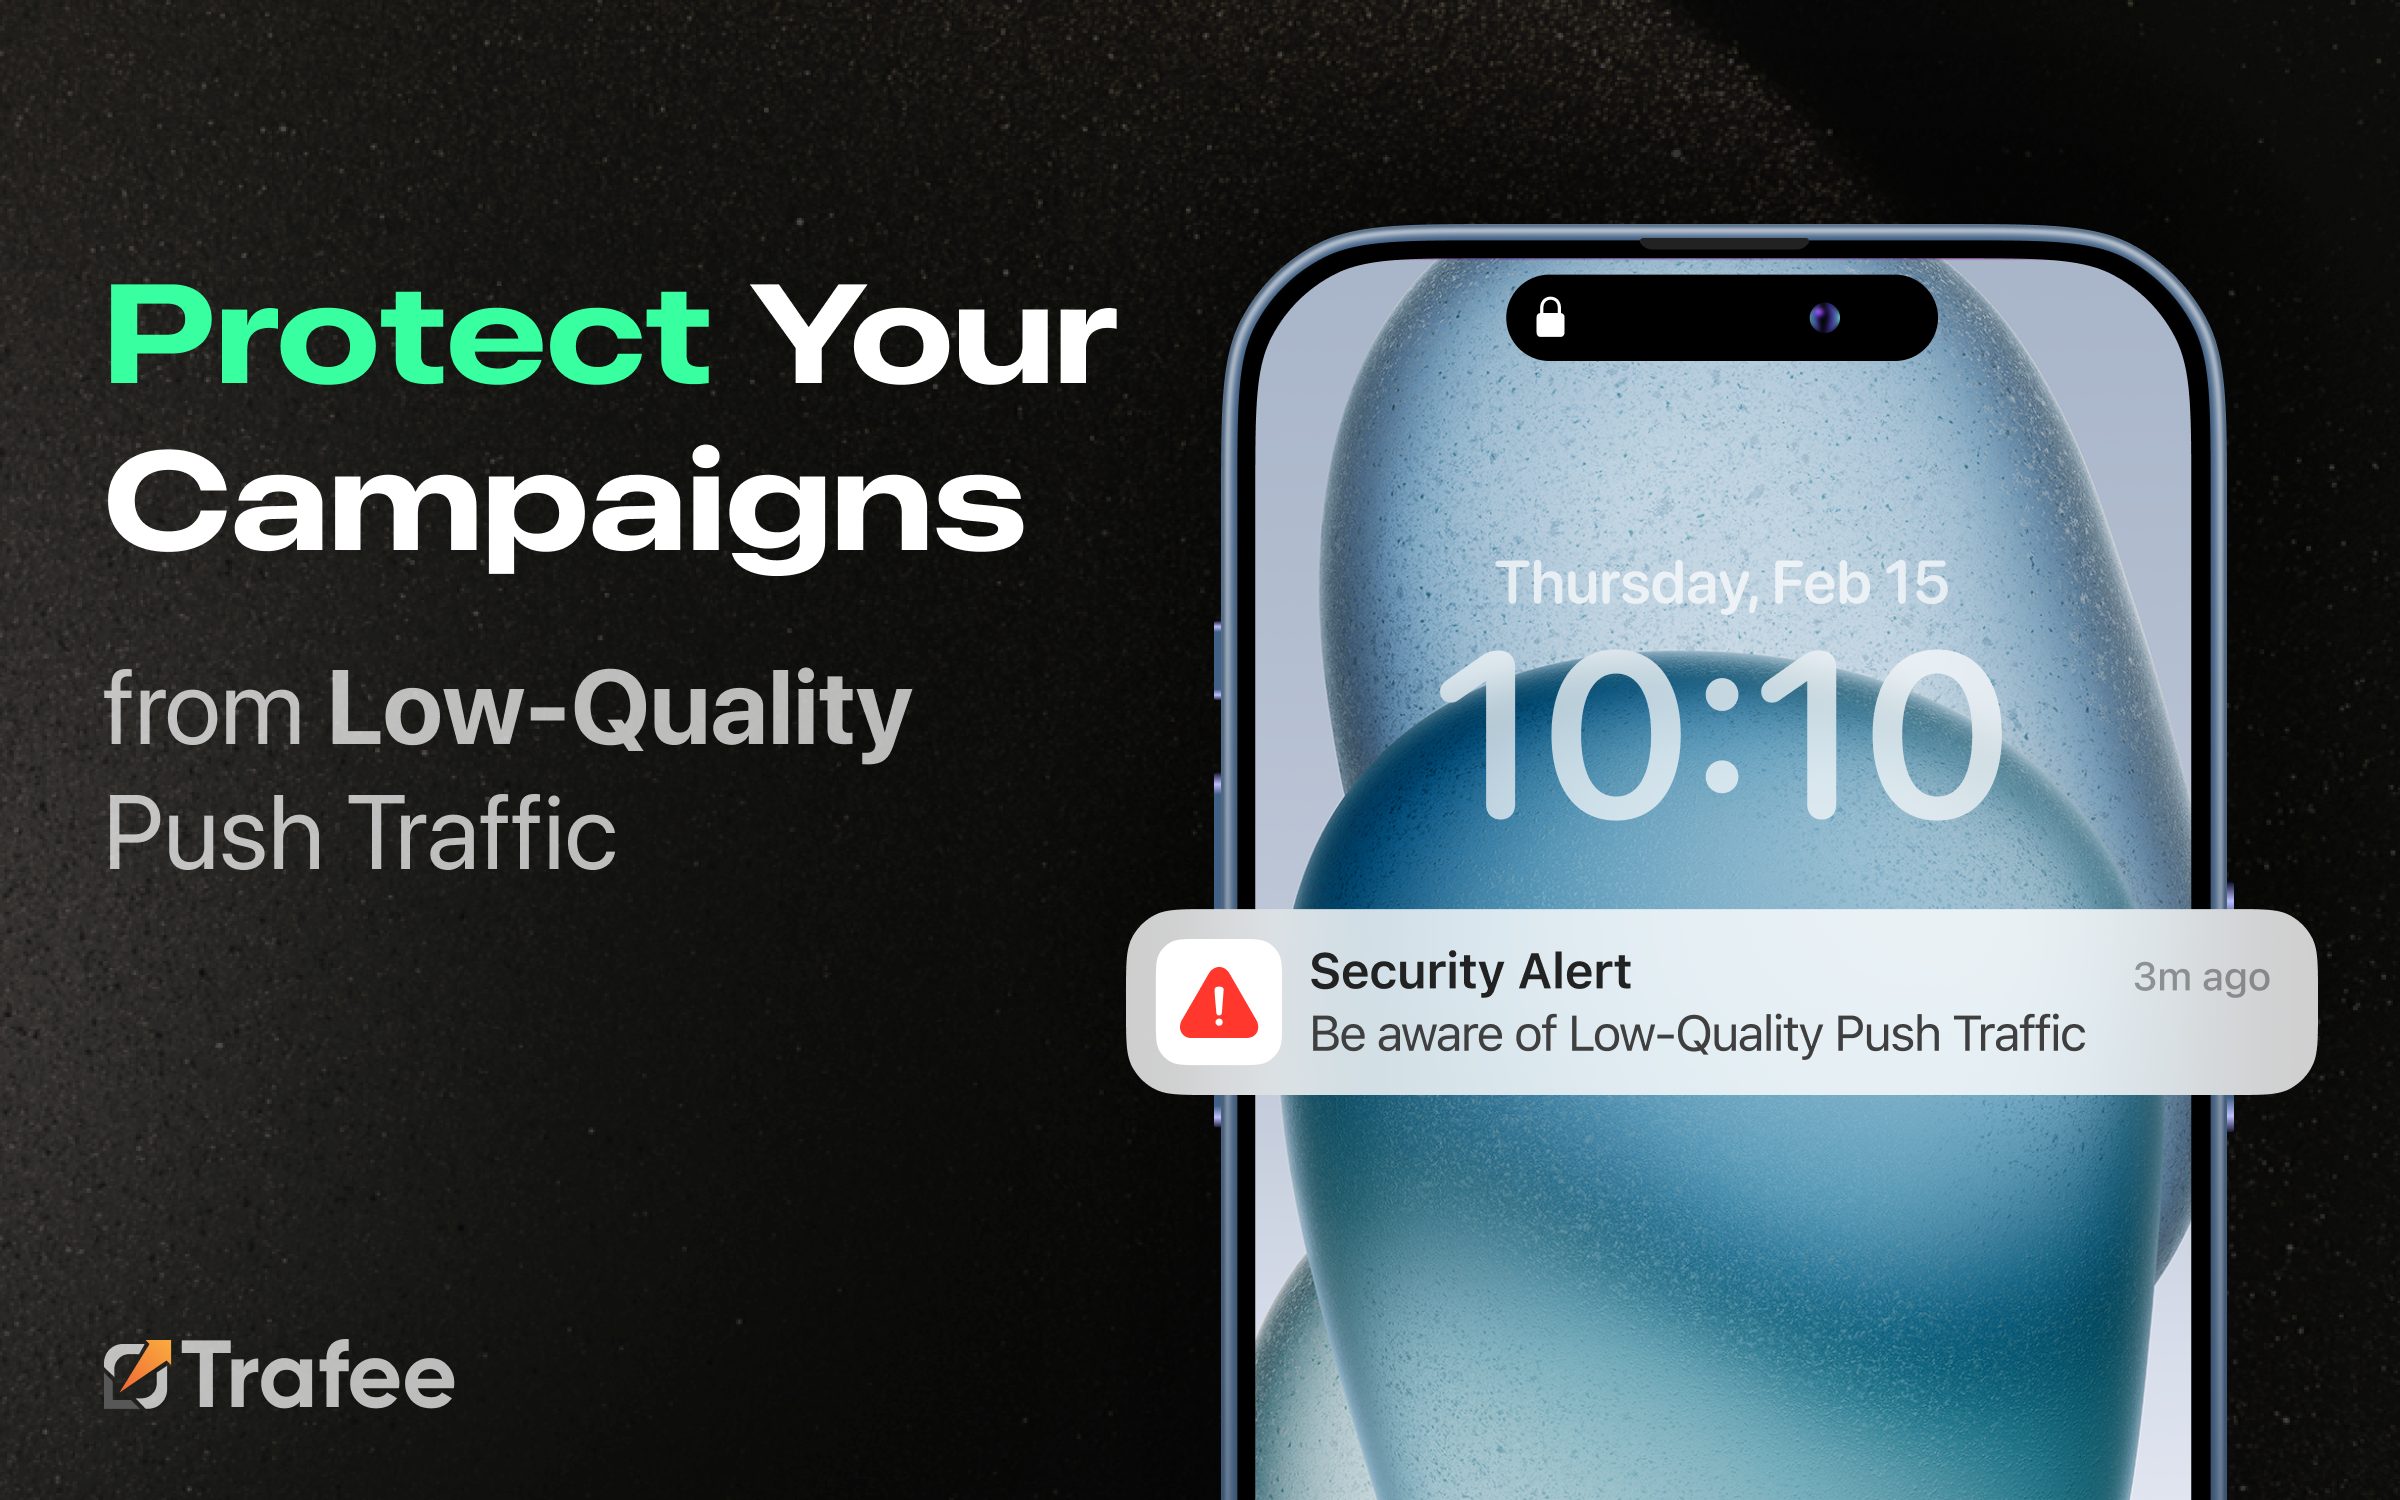 Protect Your Campaigns from Low-Quality Push Traffic